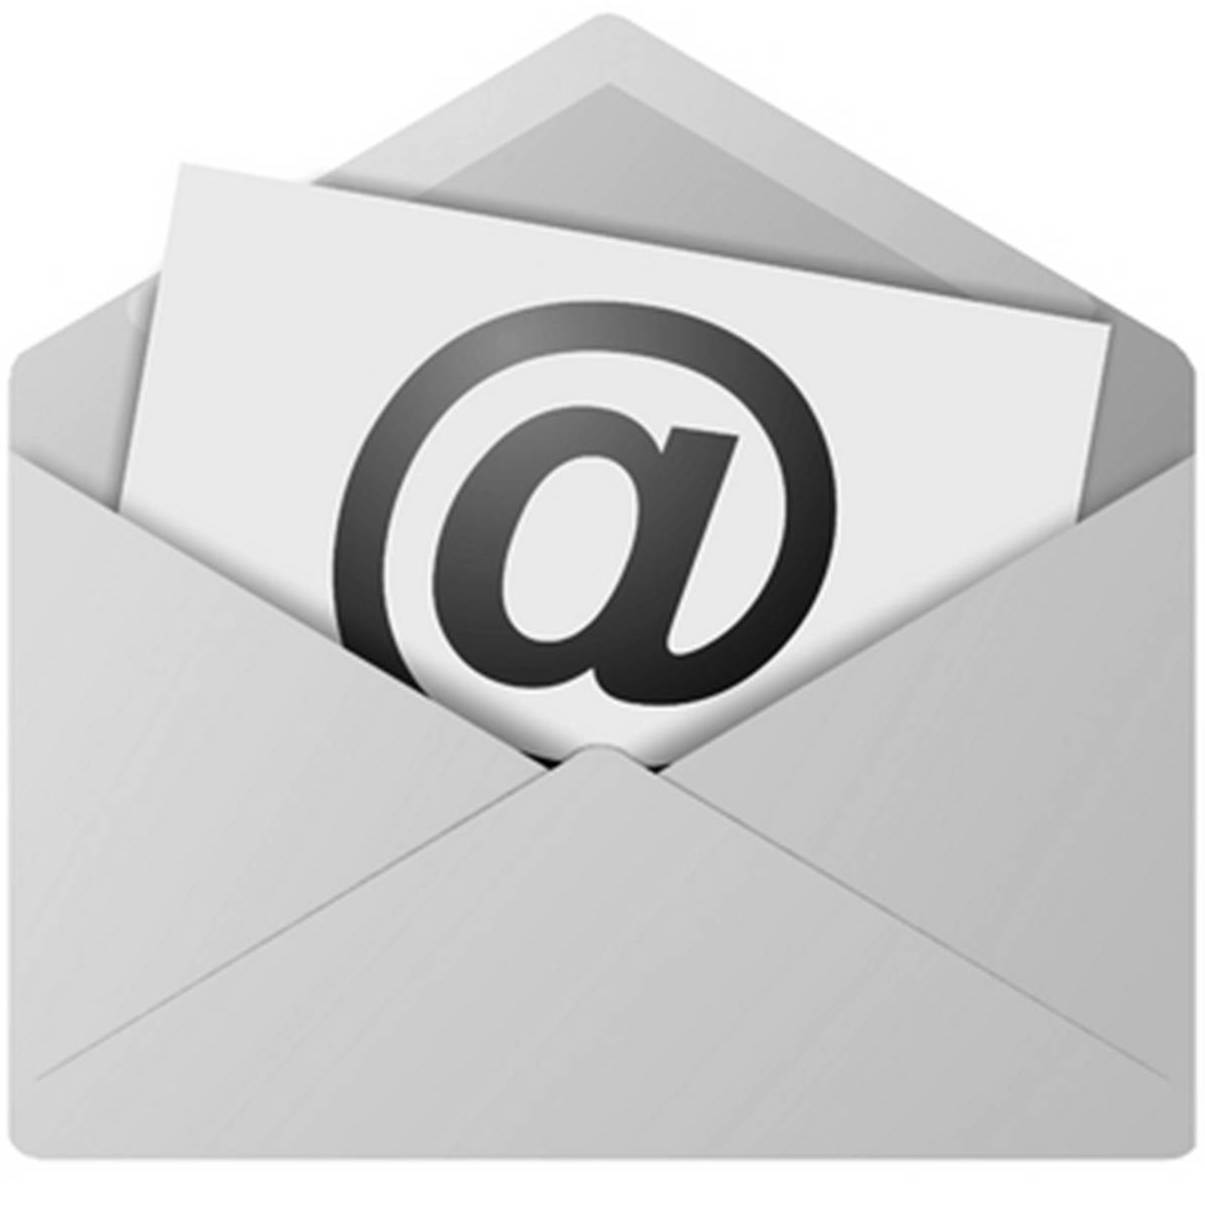 Email Icon - New Social Media Icons 